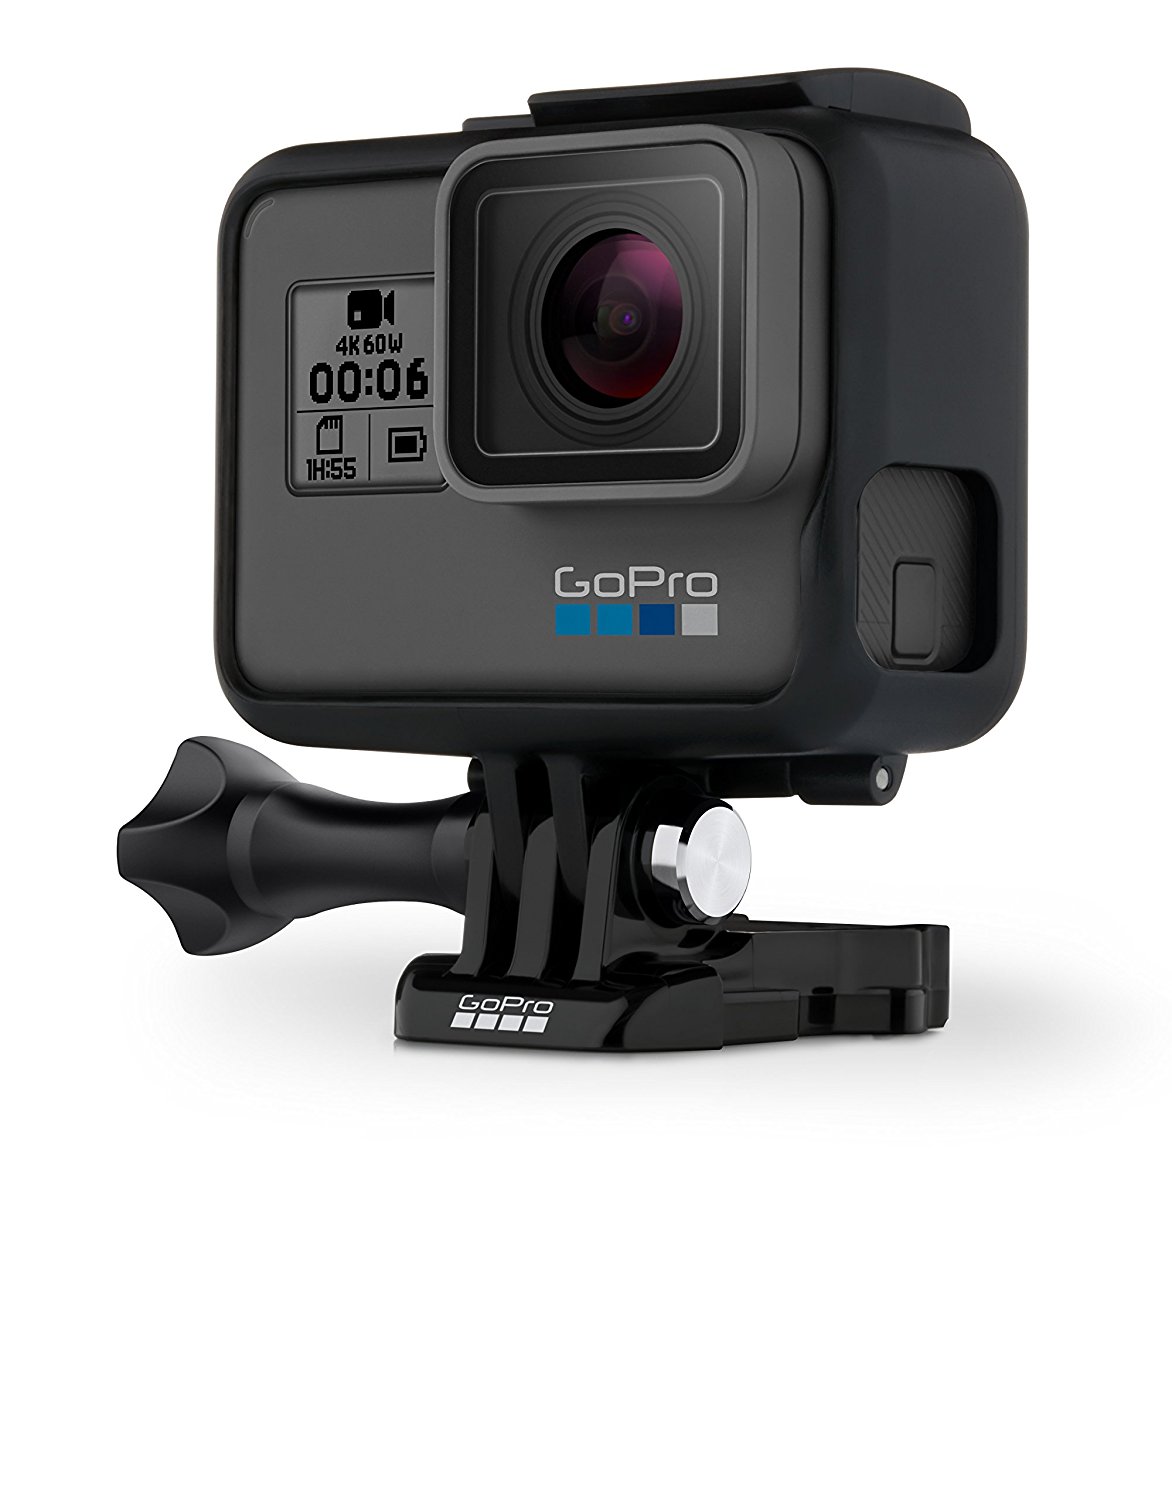 what is the best app for the gopro camera to use on my chromebook